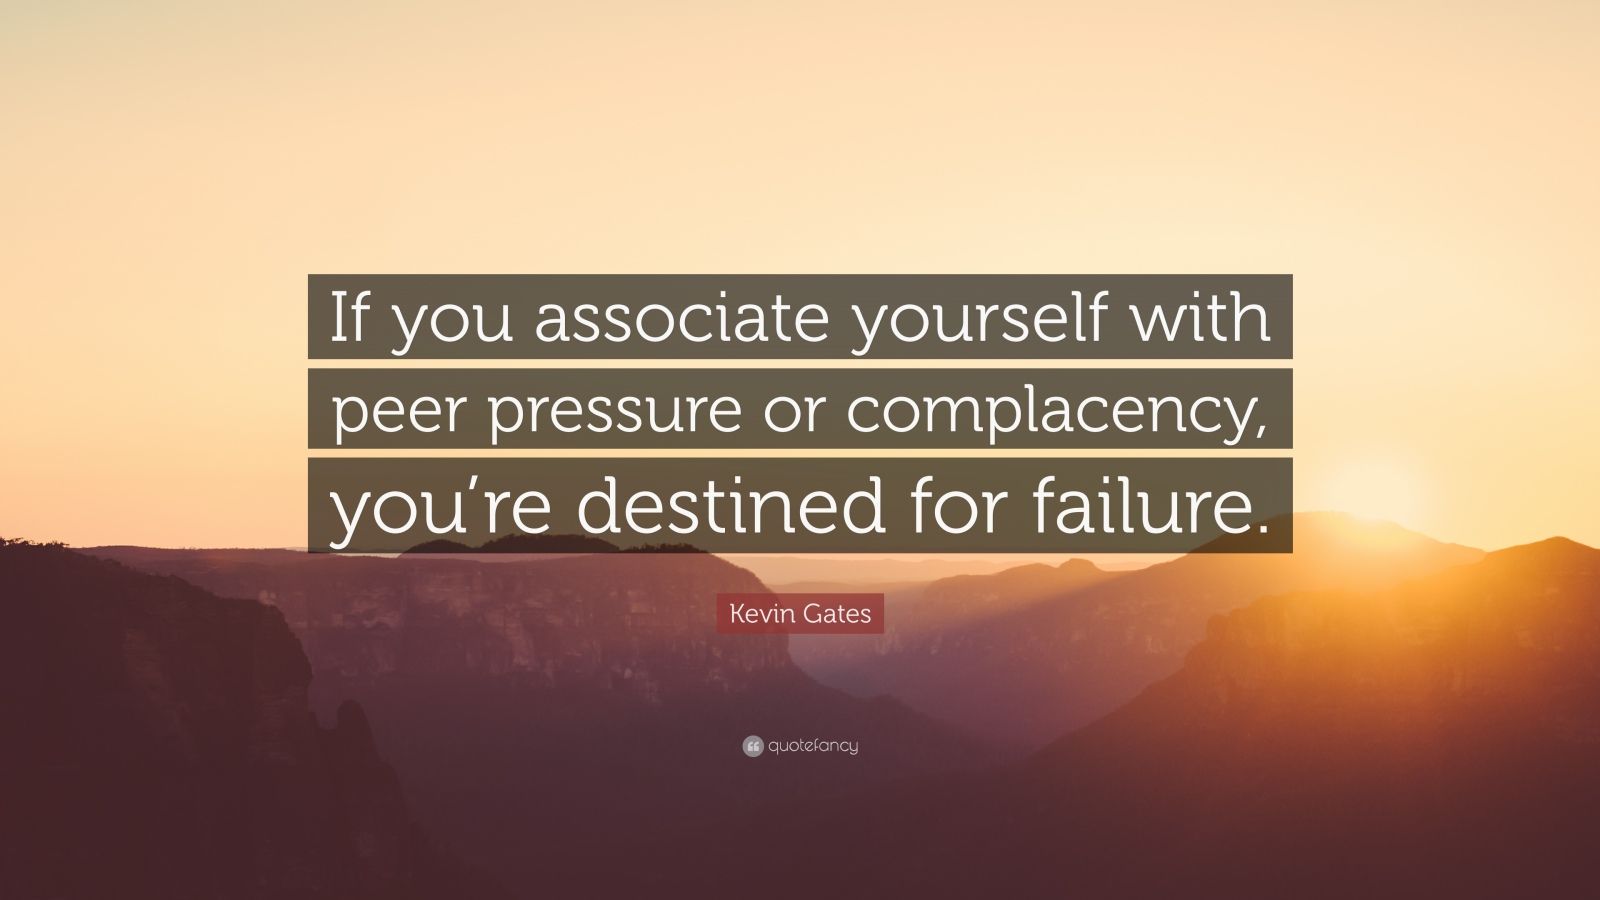 Kevin Gates Quote: "If you associate yourself with peer pressure or complacency, you're destined ...